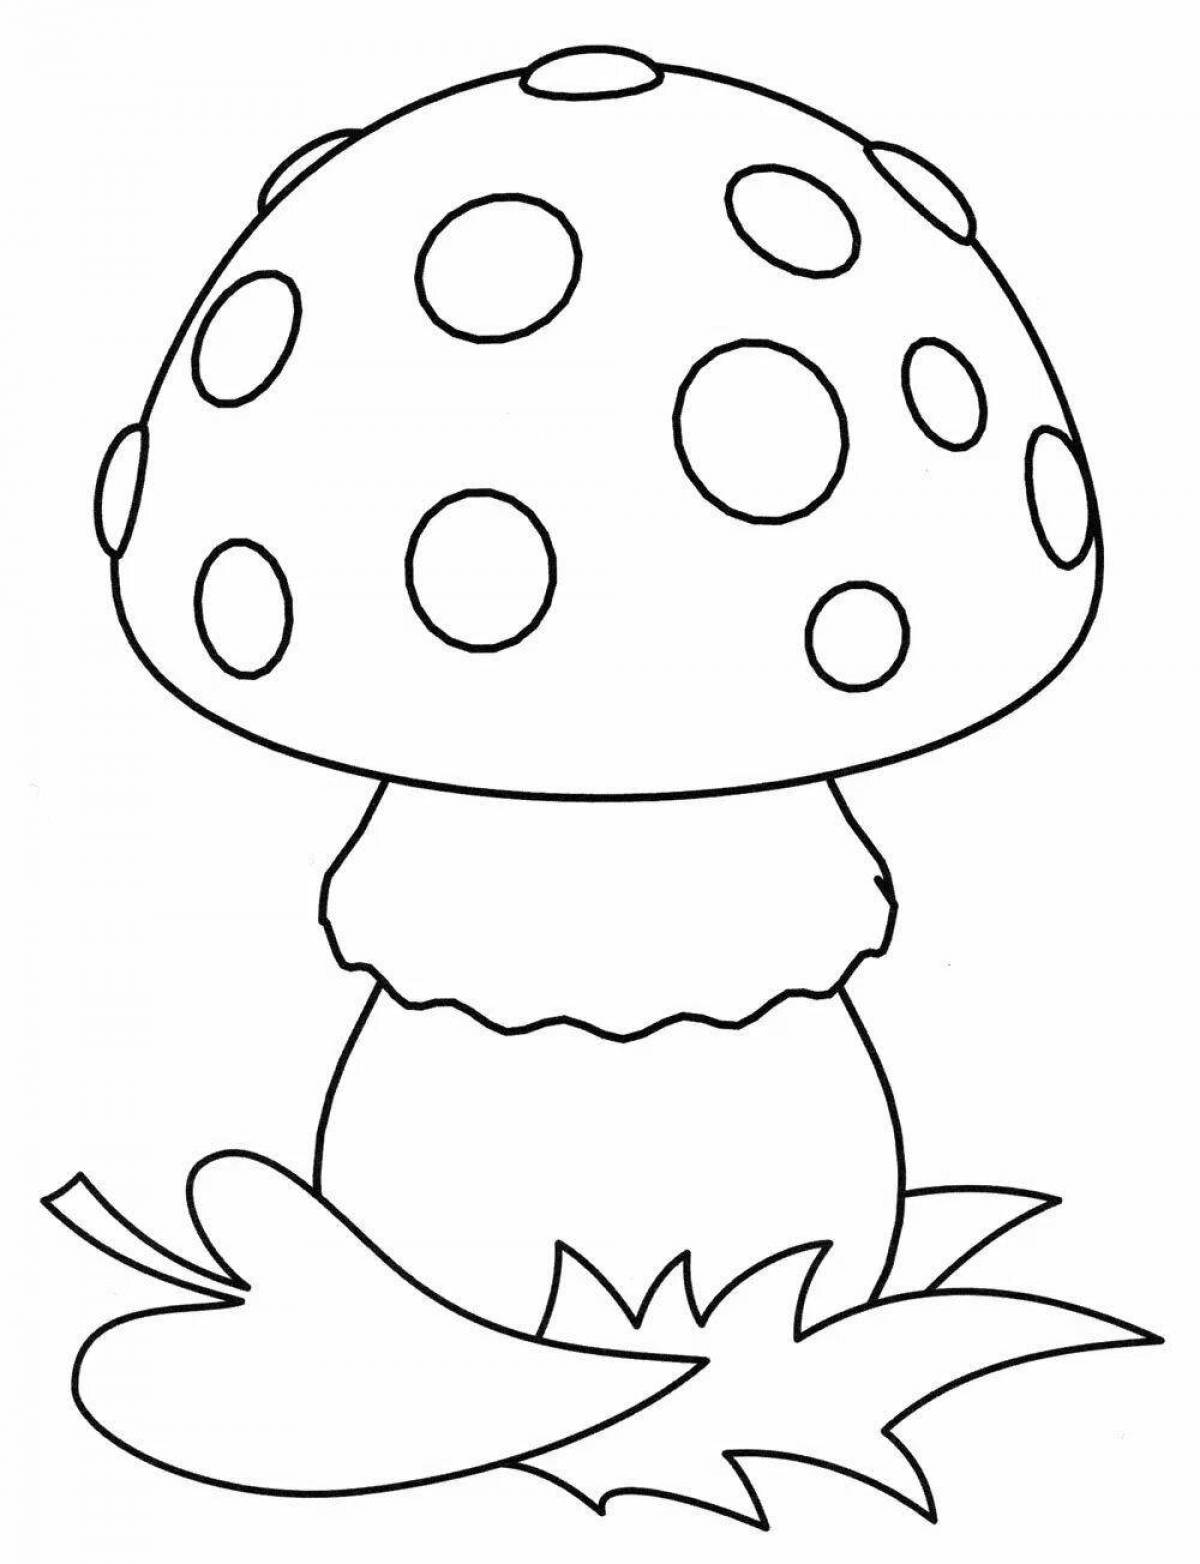 Playful mushroom coloring page for 4-5 year olds